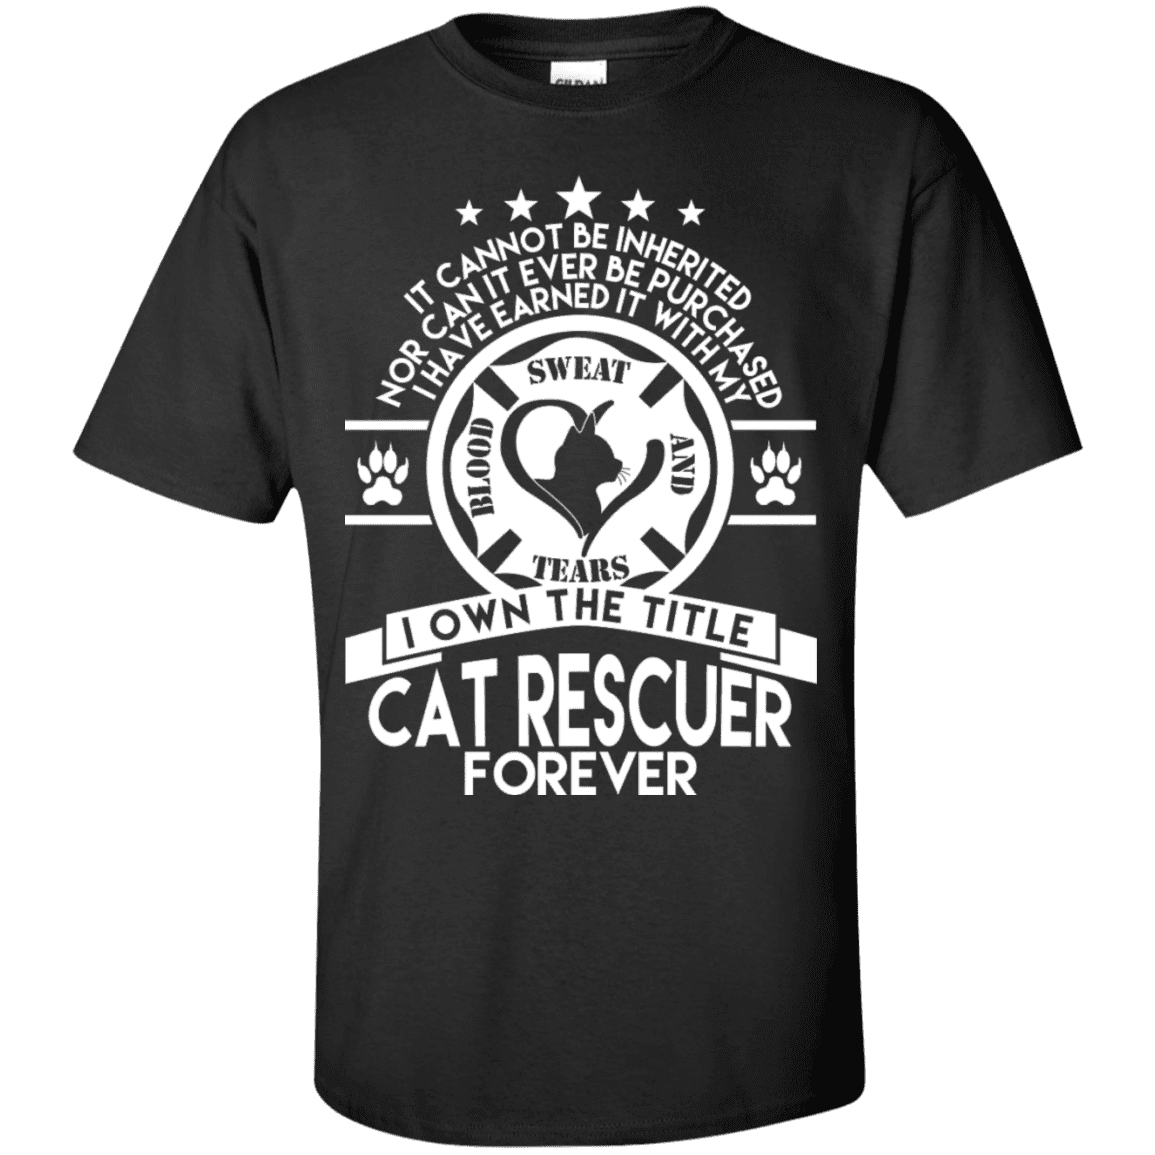 Cat Rescuer Forever - T Shirt.